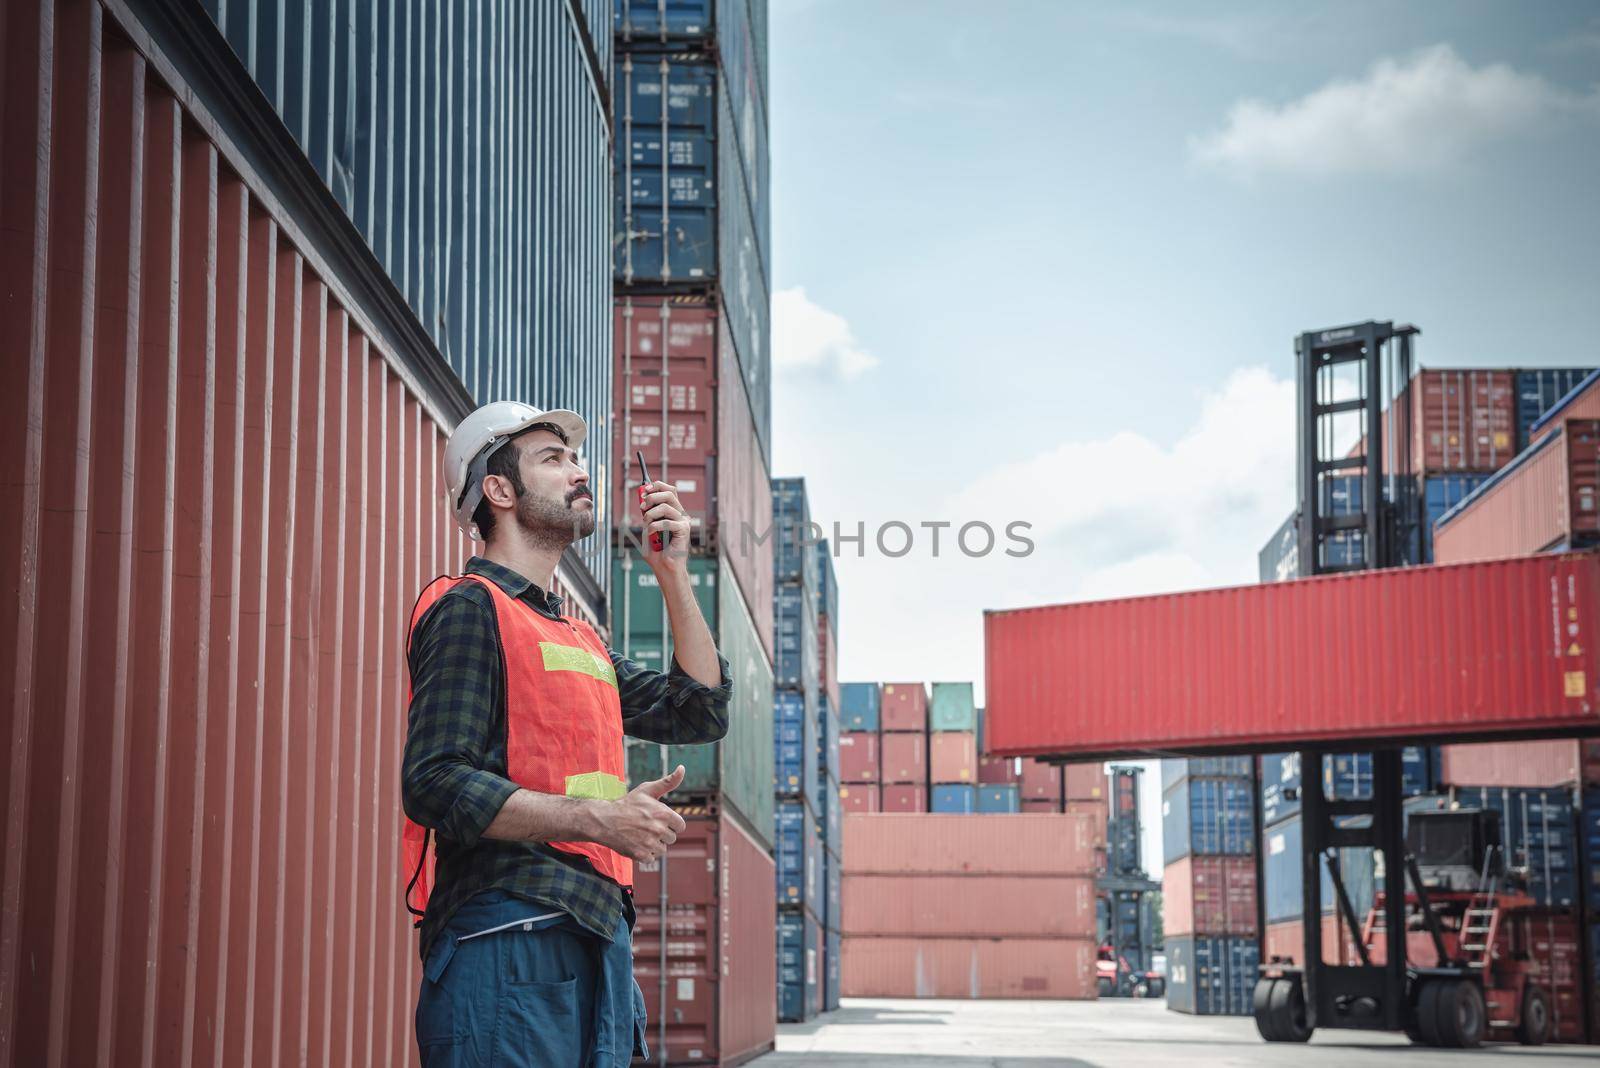 Container Logistics Shipping Management of Transportation Industry, Transport Engineer Managing Control Via Walkie Talkie in Containers Shipyard. Business Cargo Ship Import/Export Factory Logistic. by MahaHeang245789